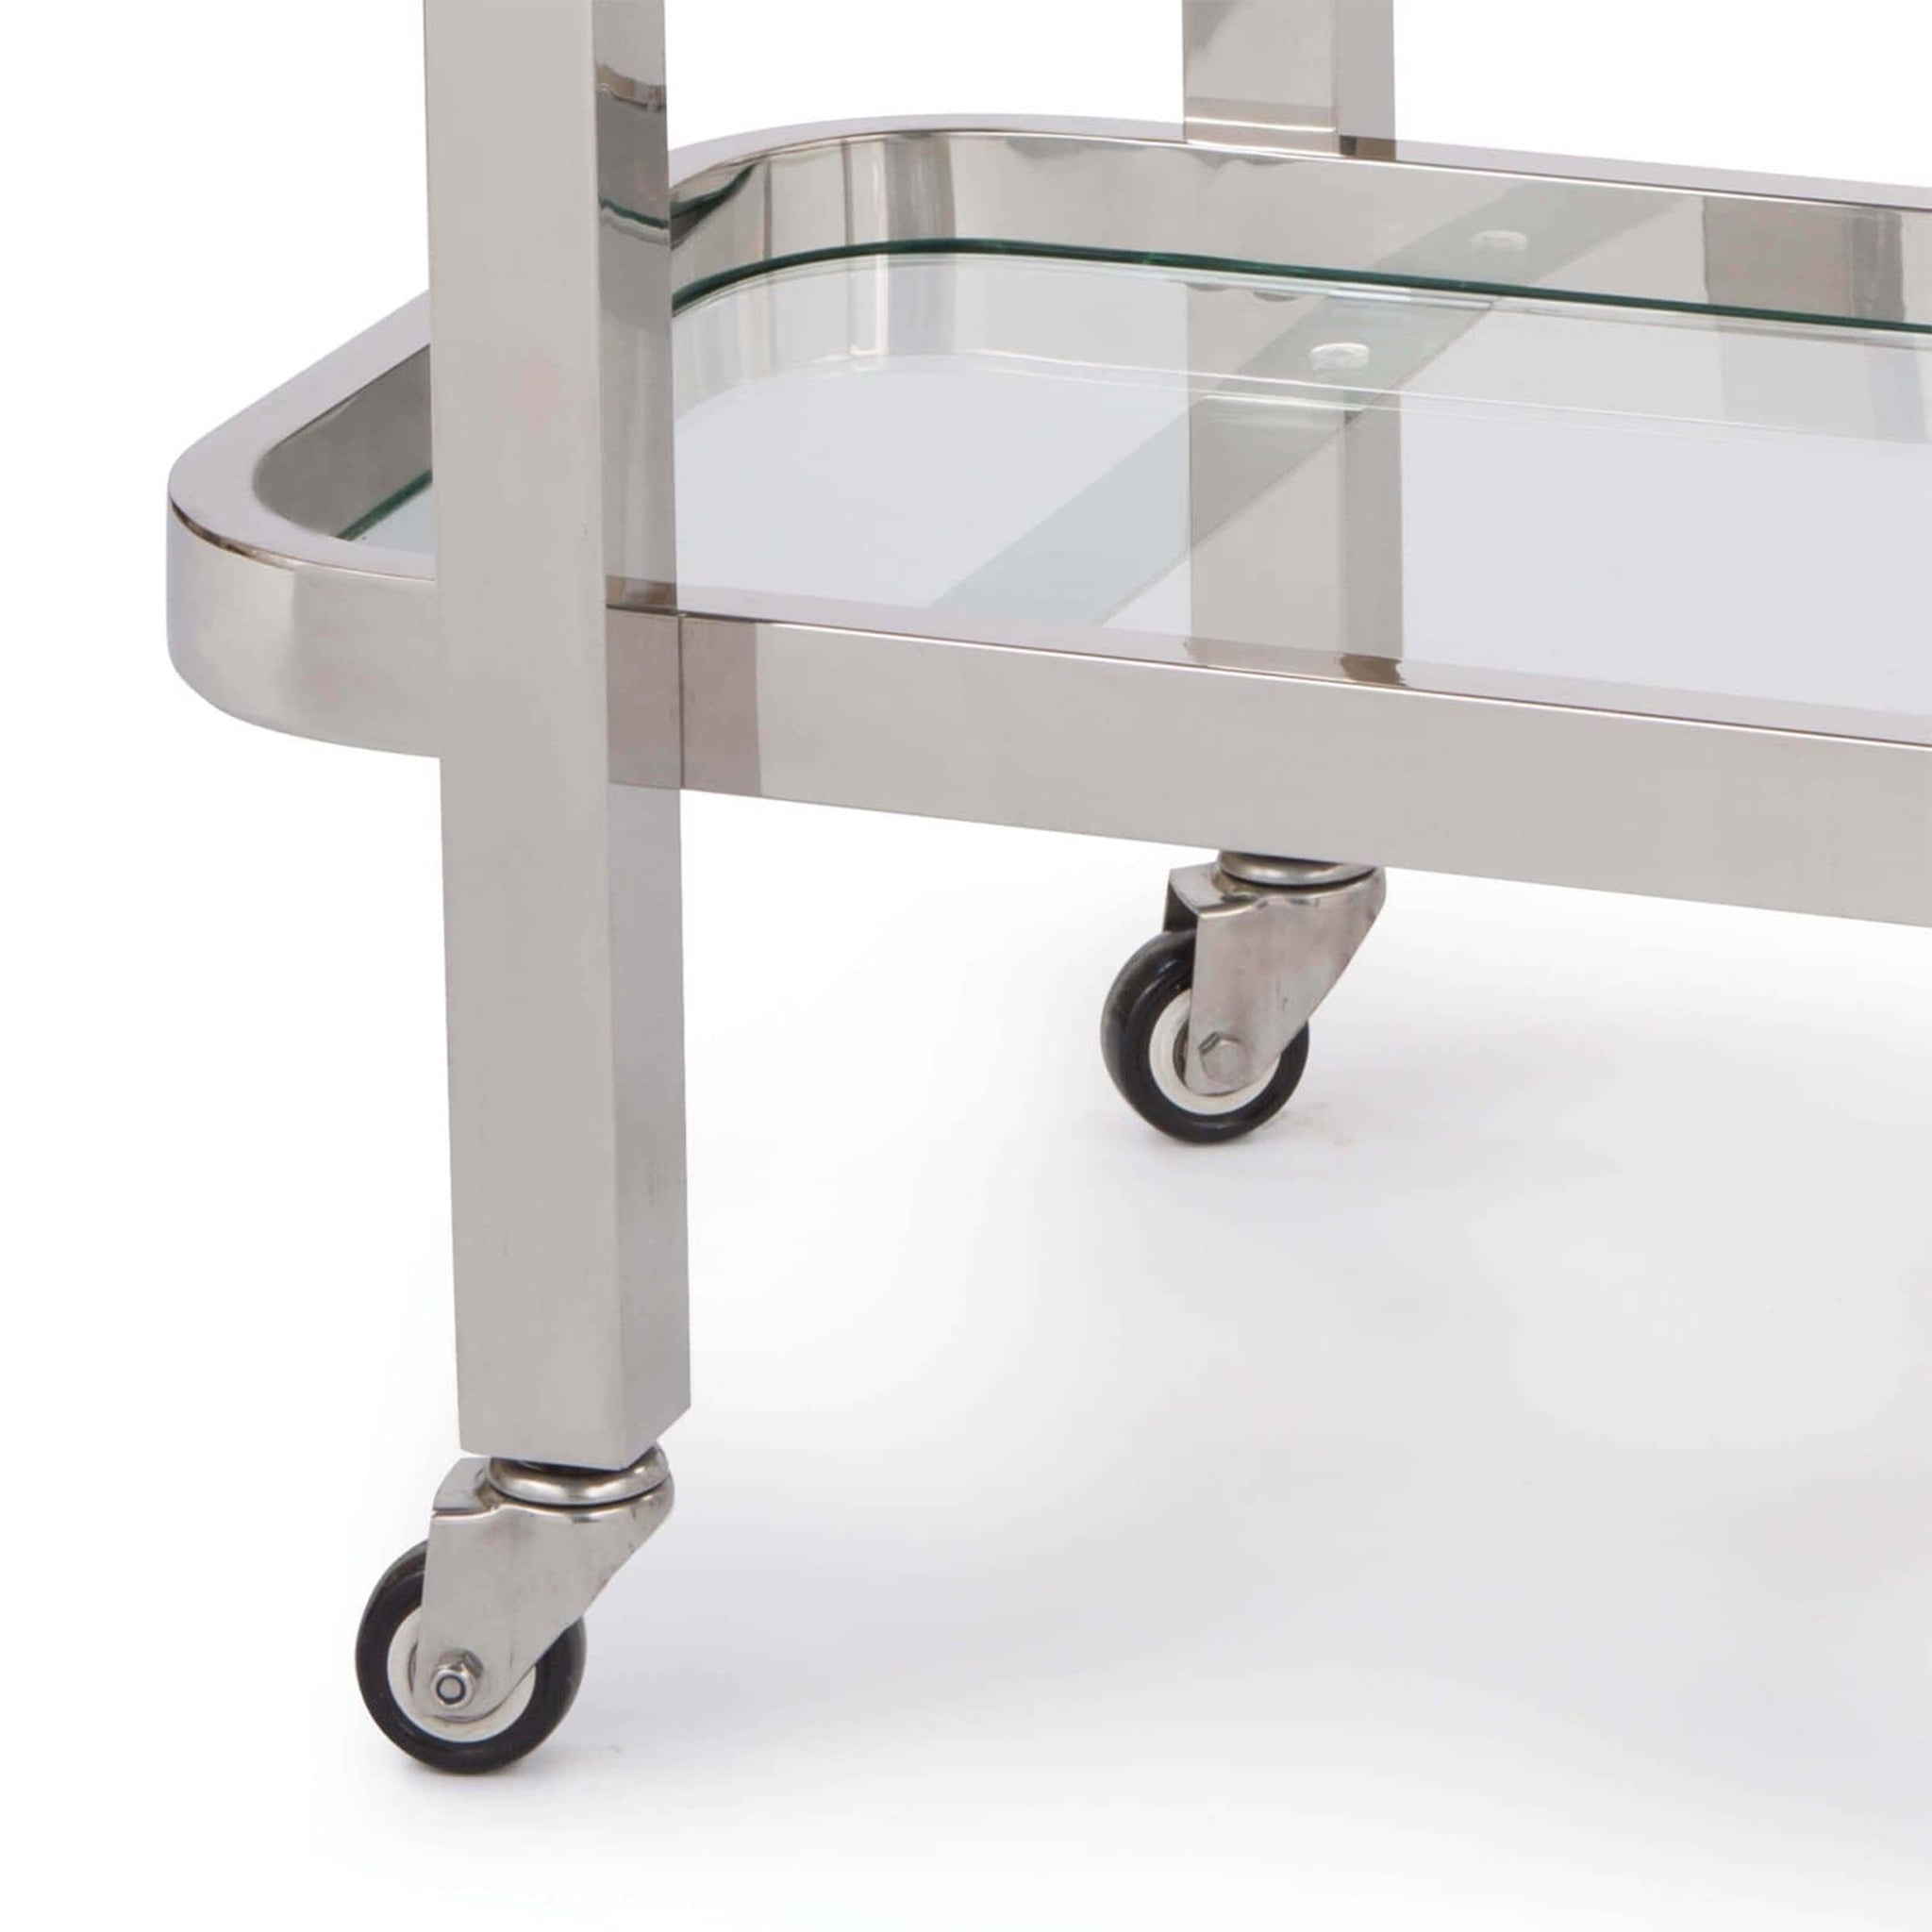 CARTER BAR CART SMALL POLISHED STAINLESS STEEL